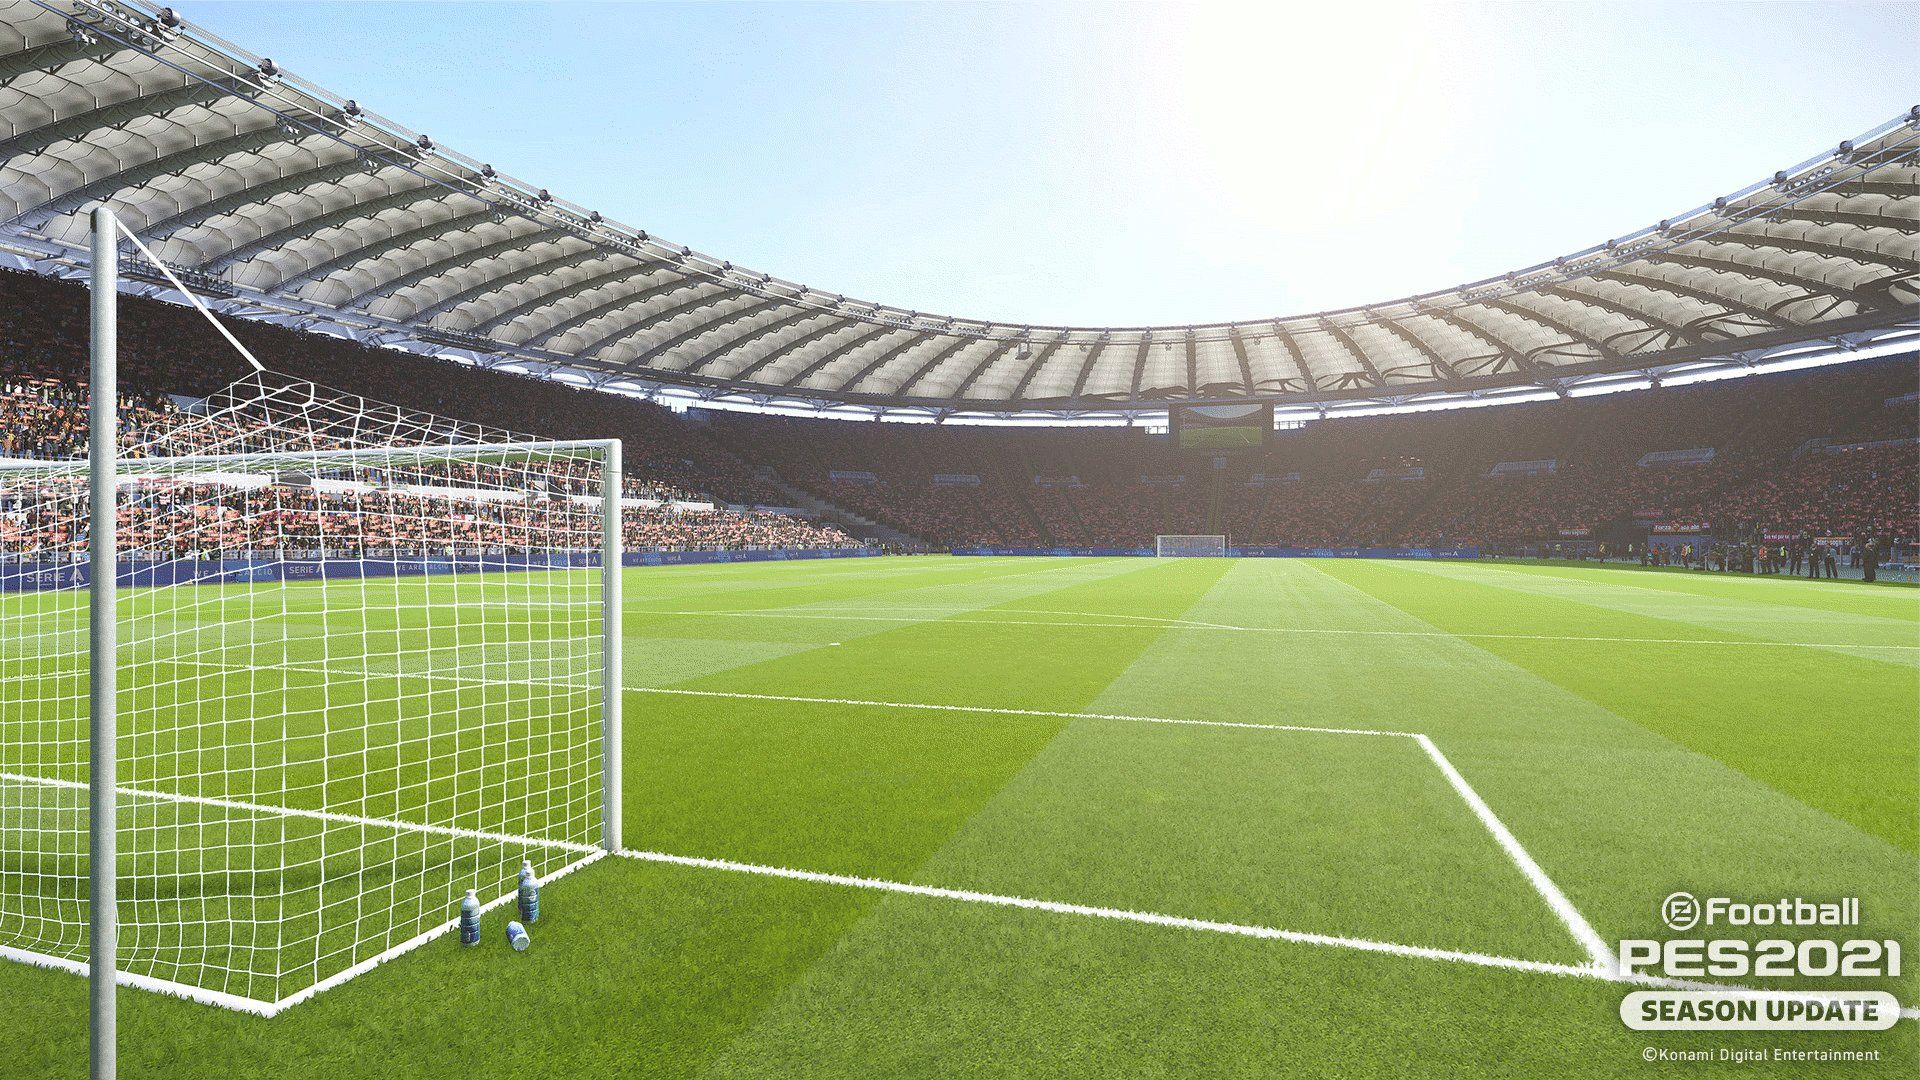 AS Roma exlcusive to PES 2021. PC News at New Game Network